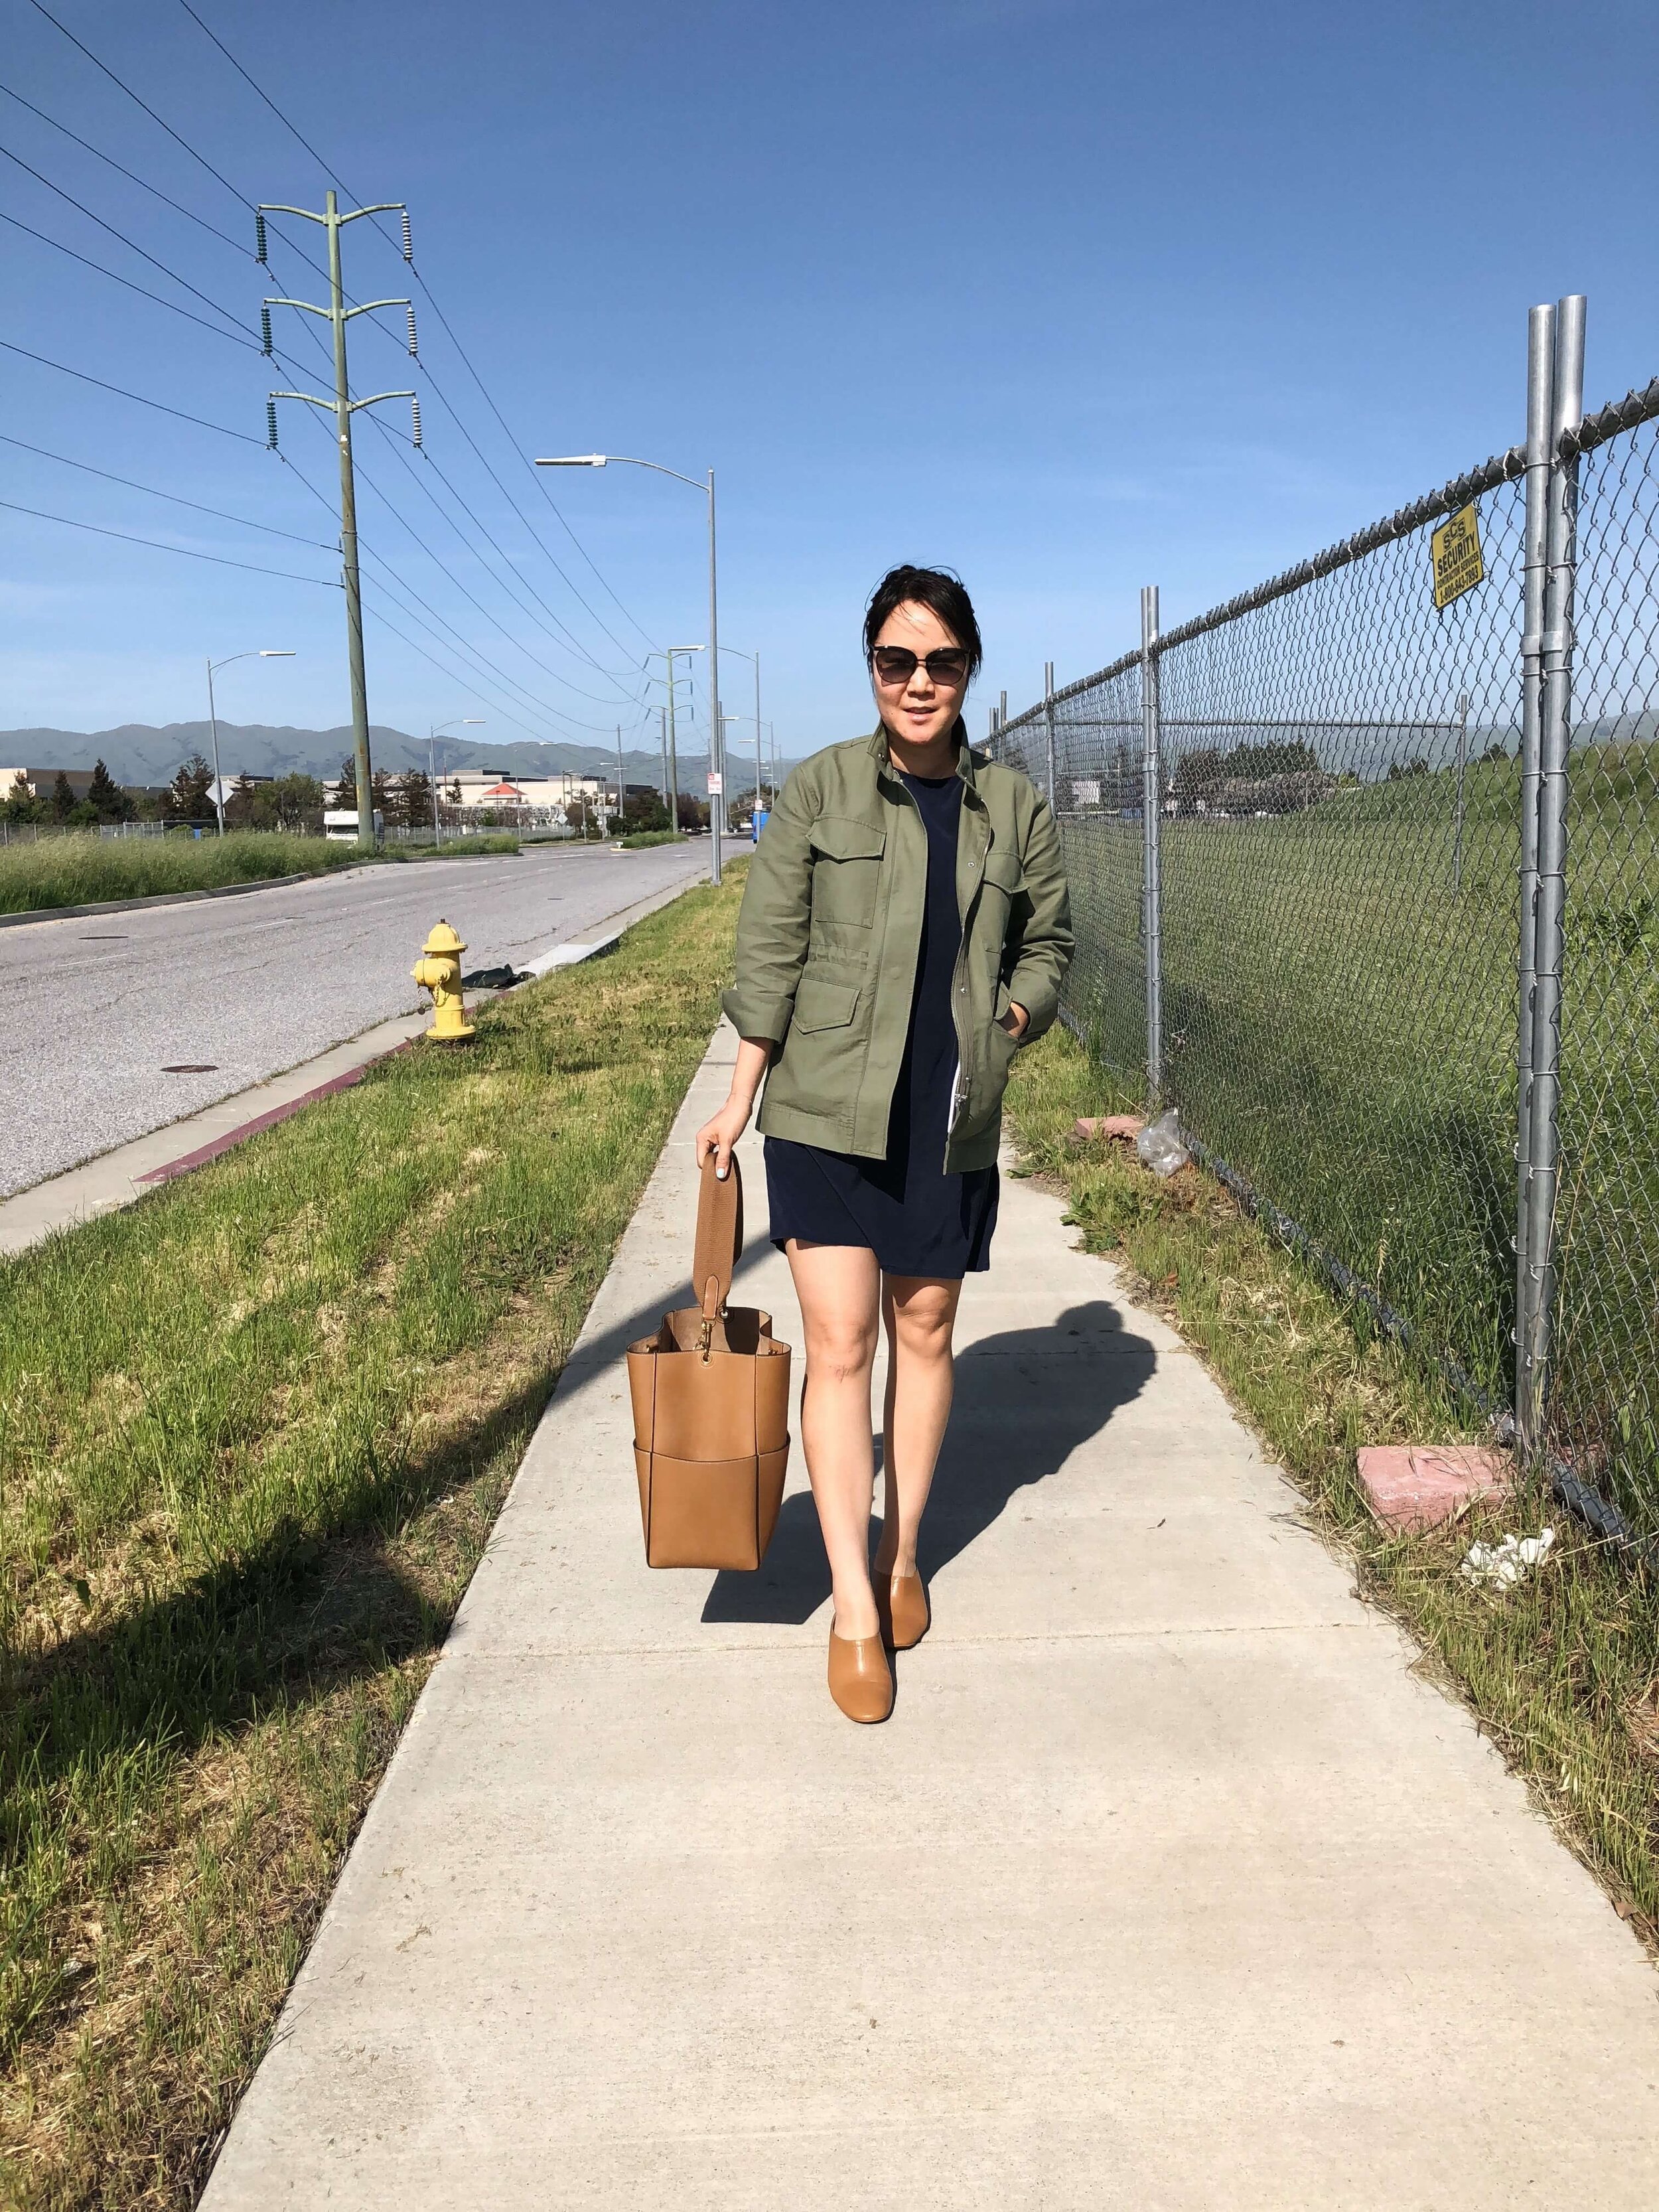 CELINE Seau Sangle Bag Review {Updated May 2021} — Fairly Curated